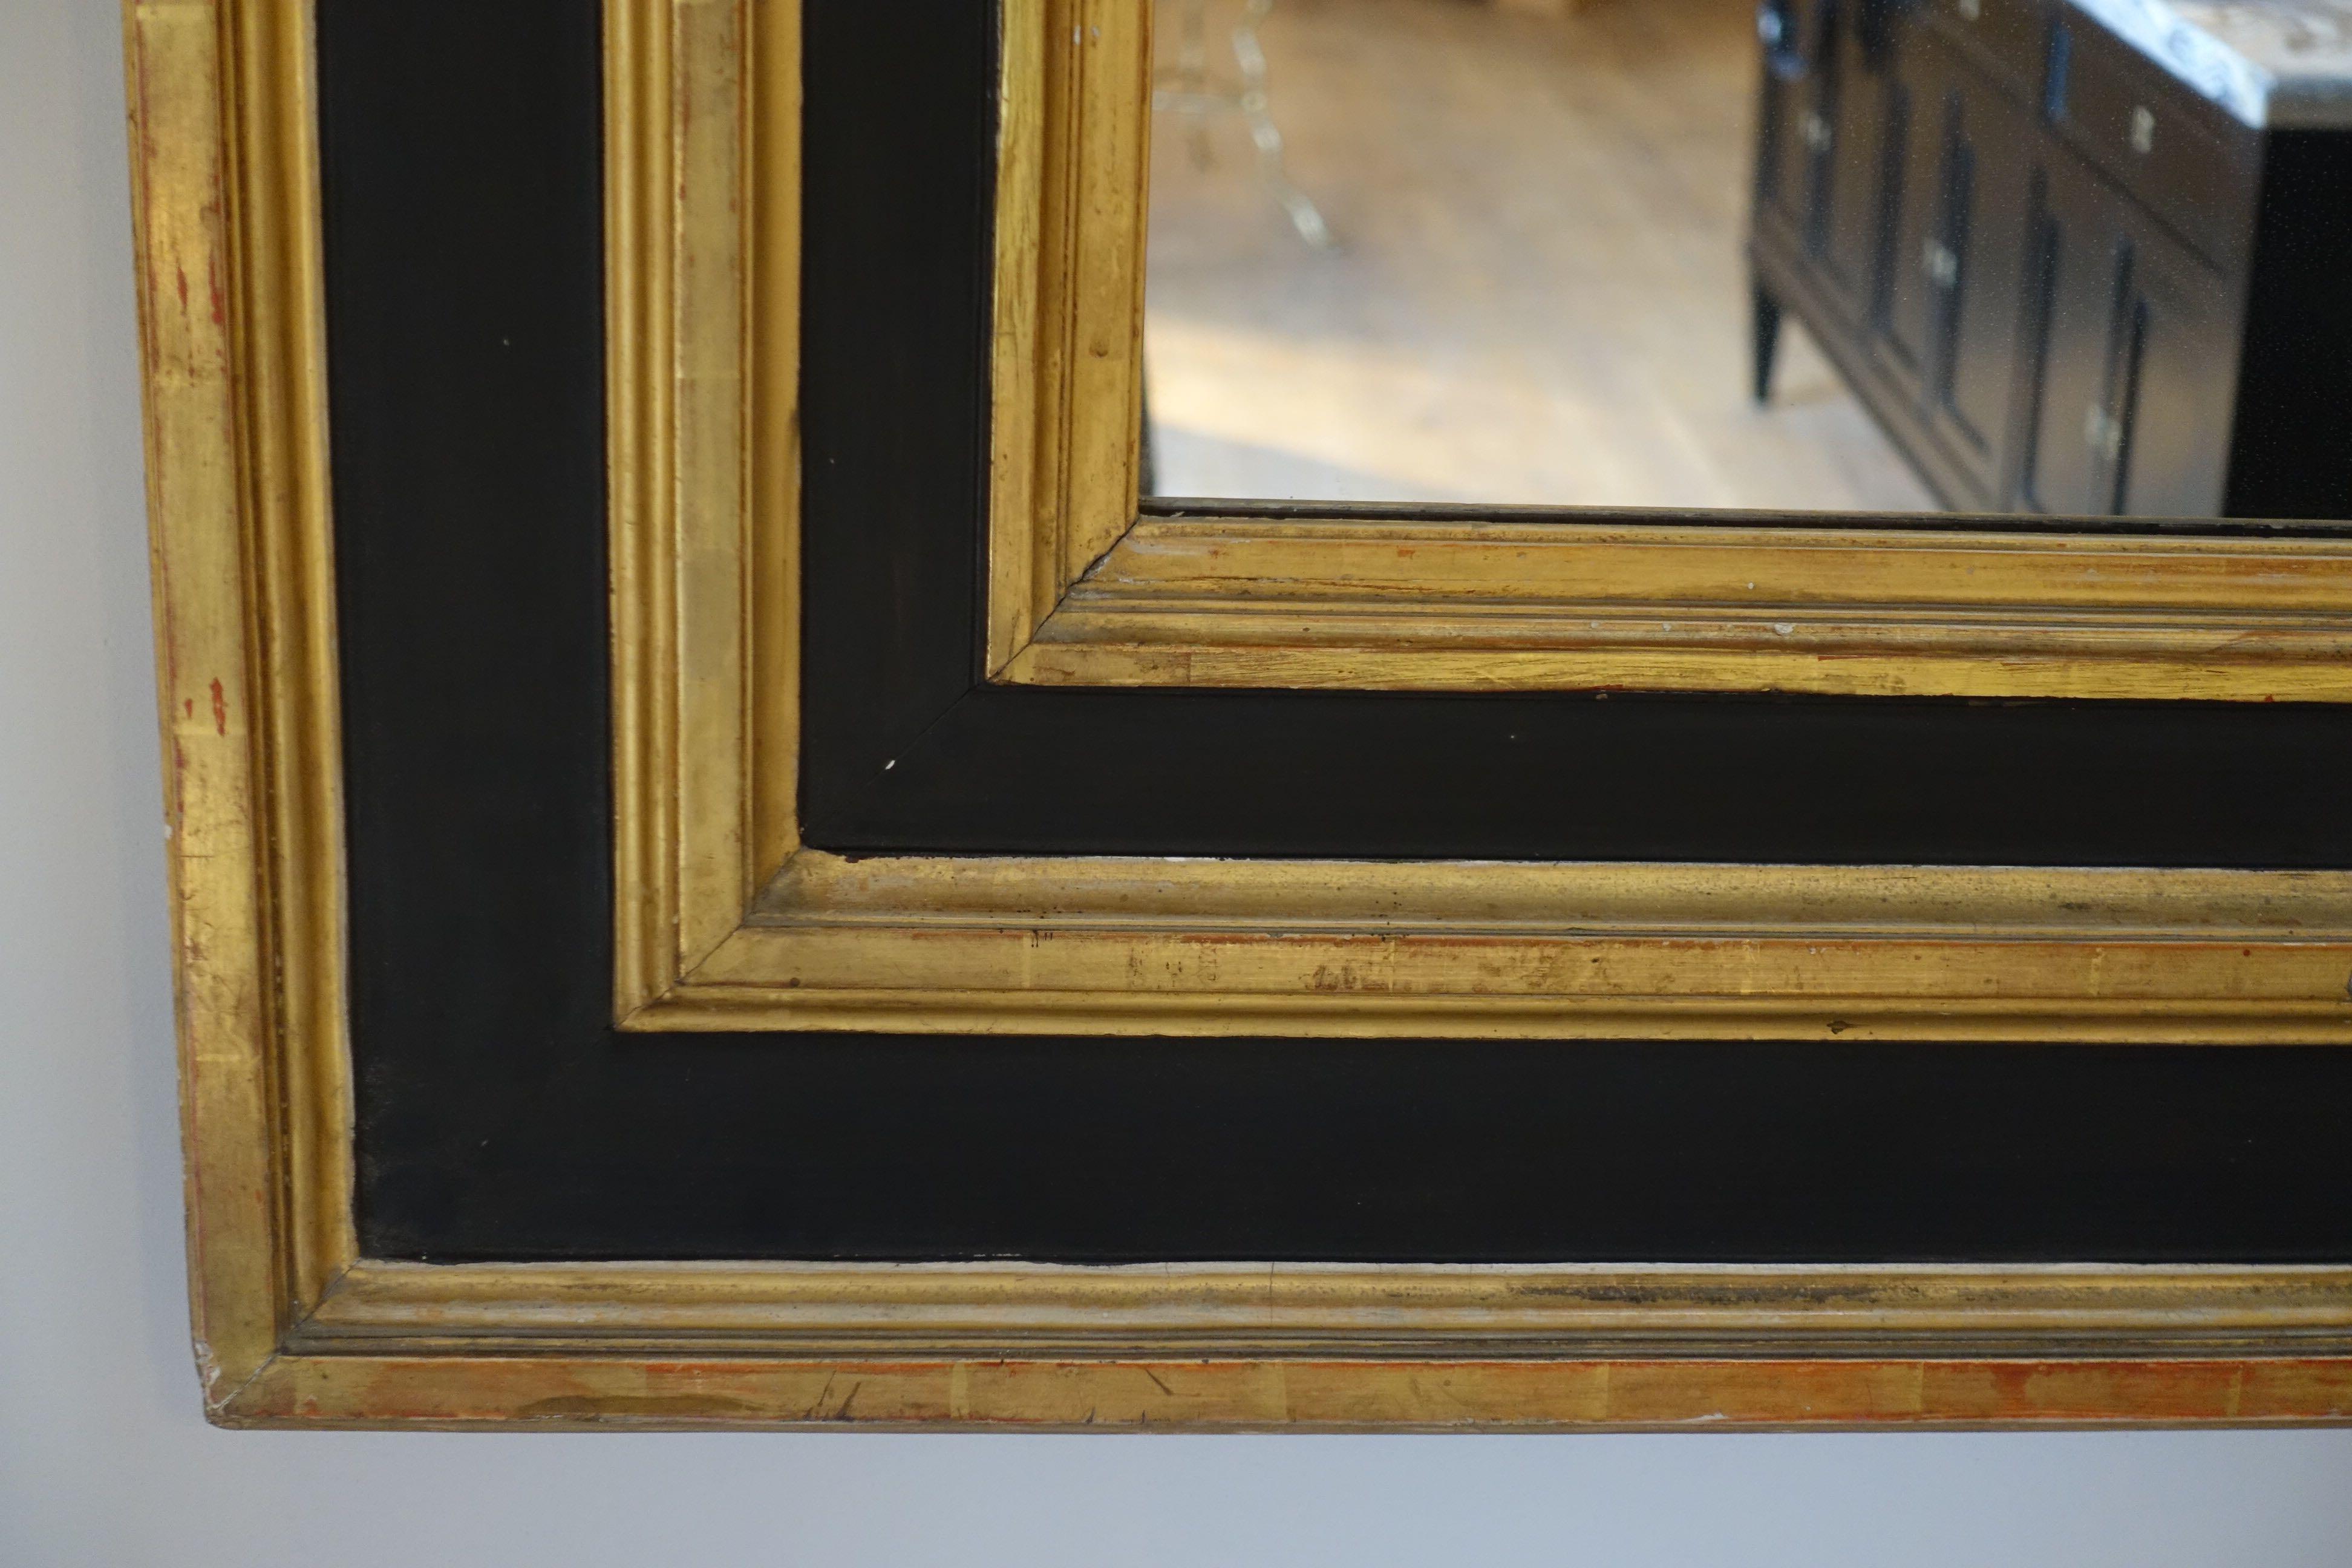 19th century French extra-large mirror with ebonized black wood frame. Three rows of gold gilt accent details emphasize the frame.
Original mercury glass mirror in excellent condition.
   